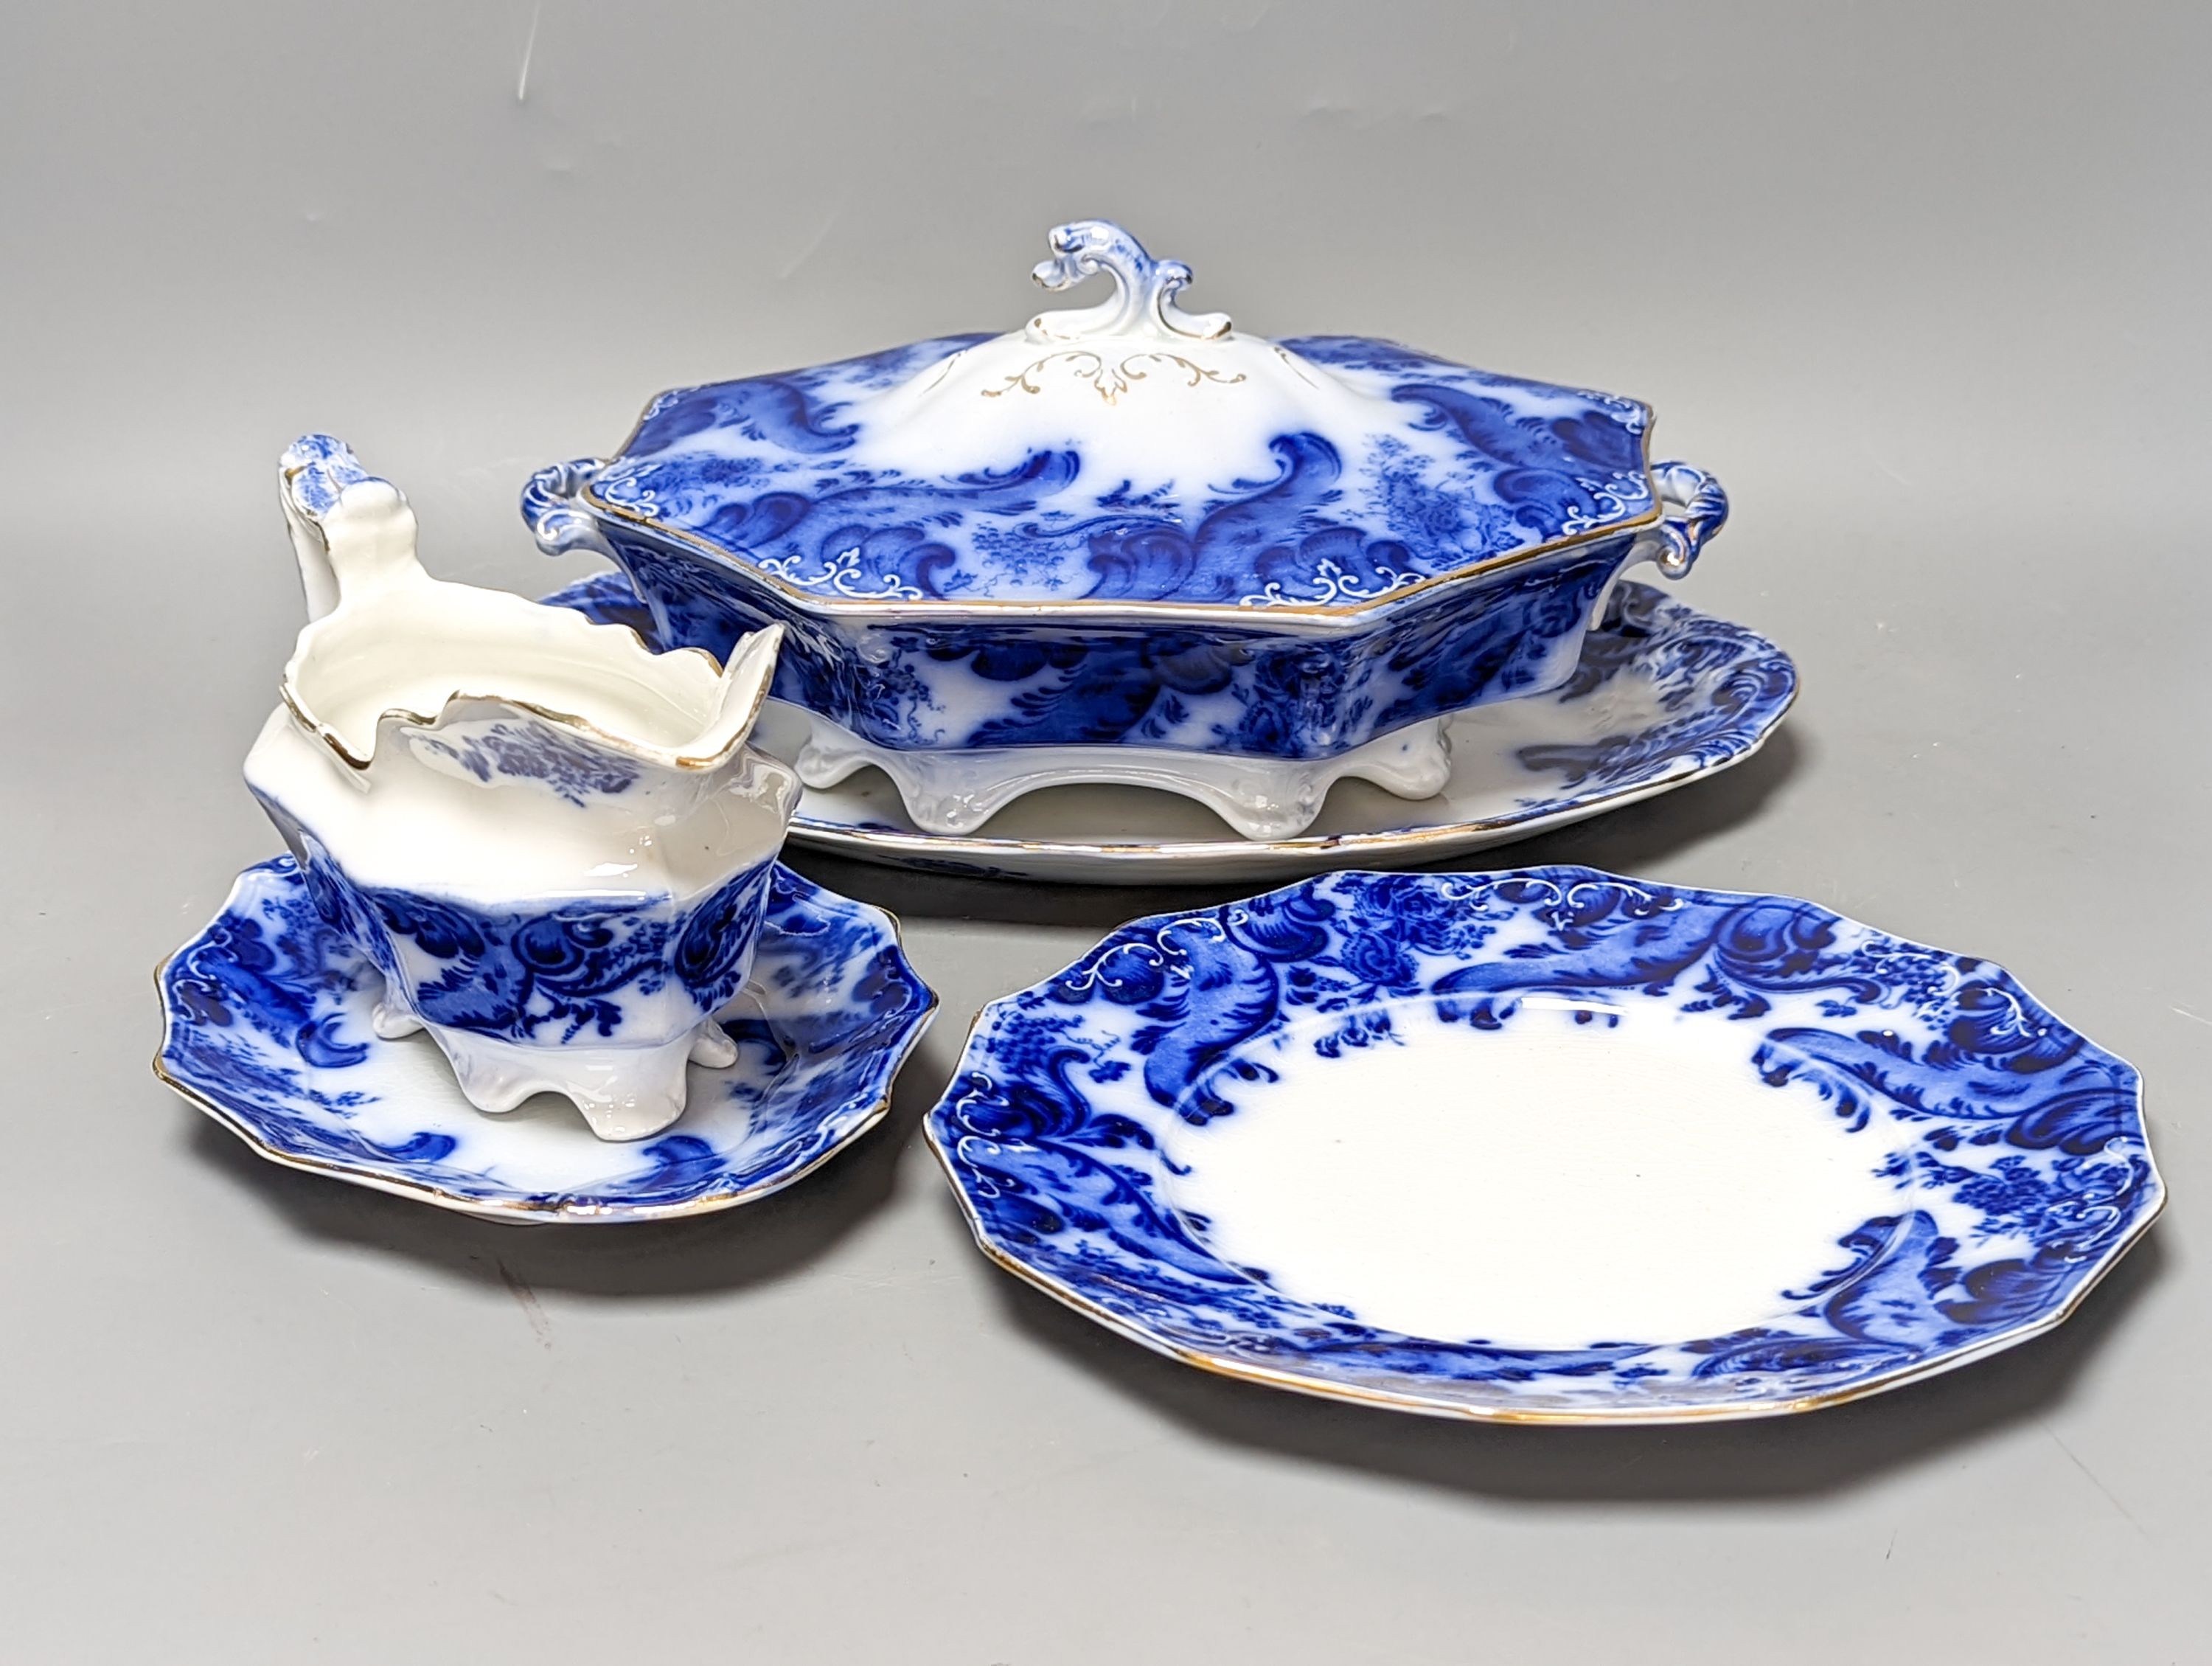 A W. H. Grindley Argyle pattern flow blue dinner service, c.1900 mostly for 12 place settings, two sauce tureens, covers and stands, two vegetable tureens and covers, two gravy boats, and six graduated meat dishes